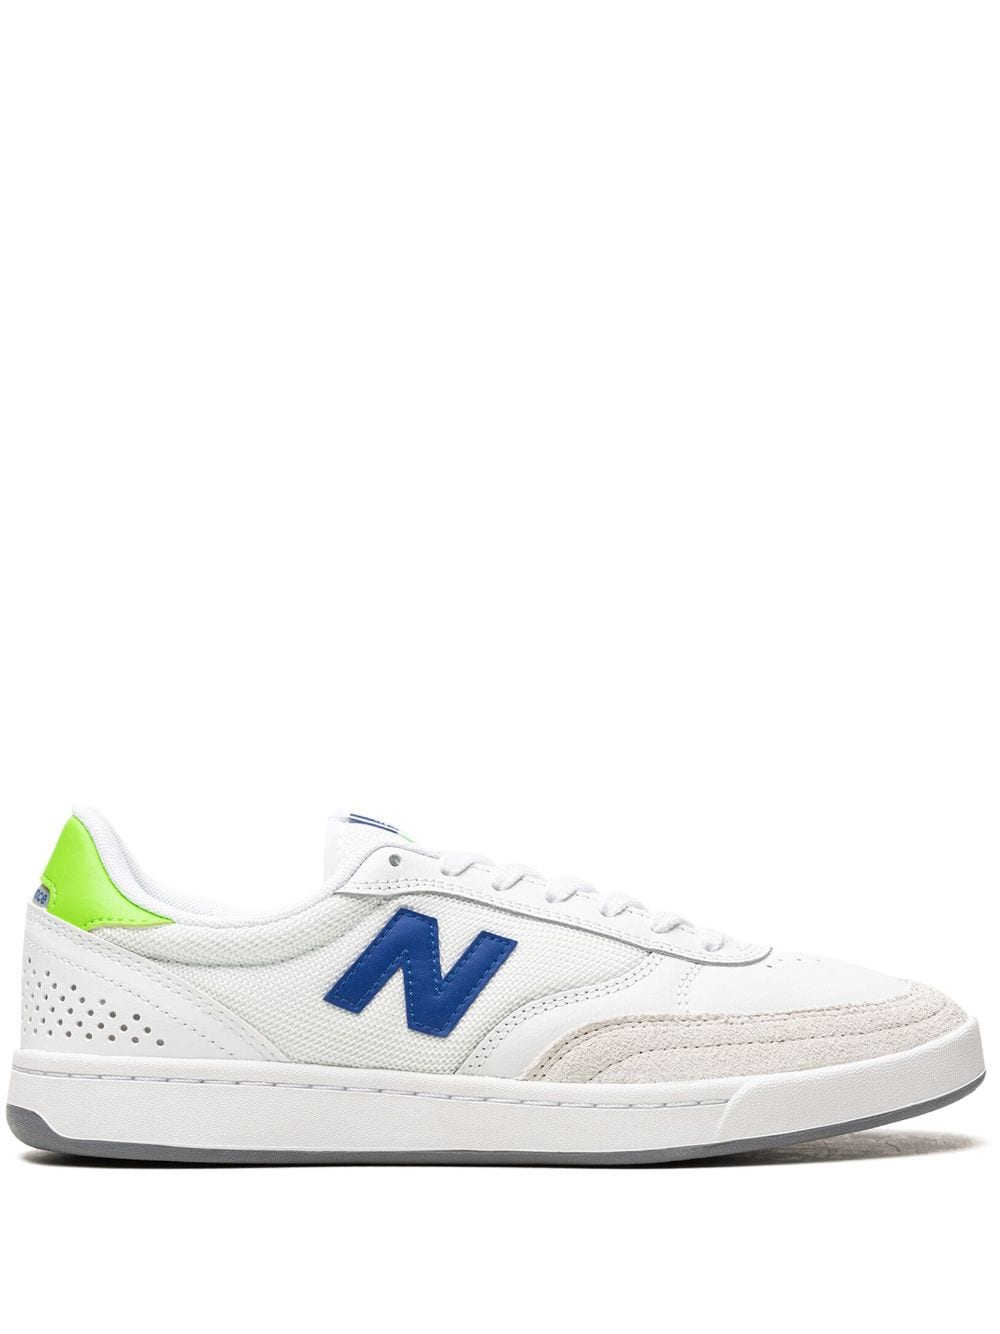 New Balance Numeric 440 "White/Royal/Lime" sneakers